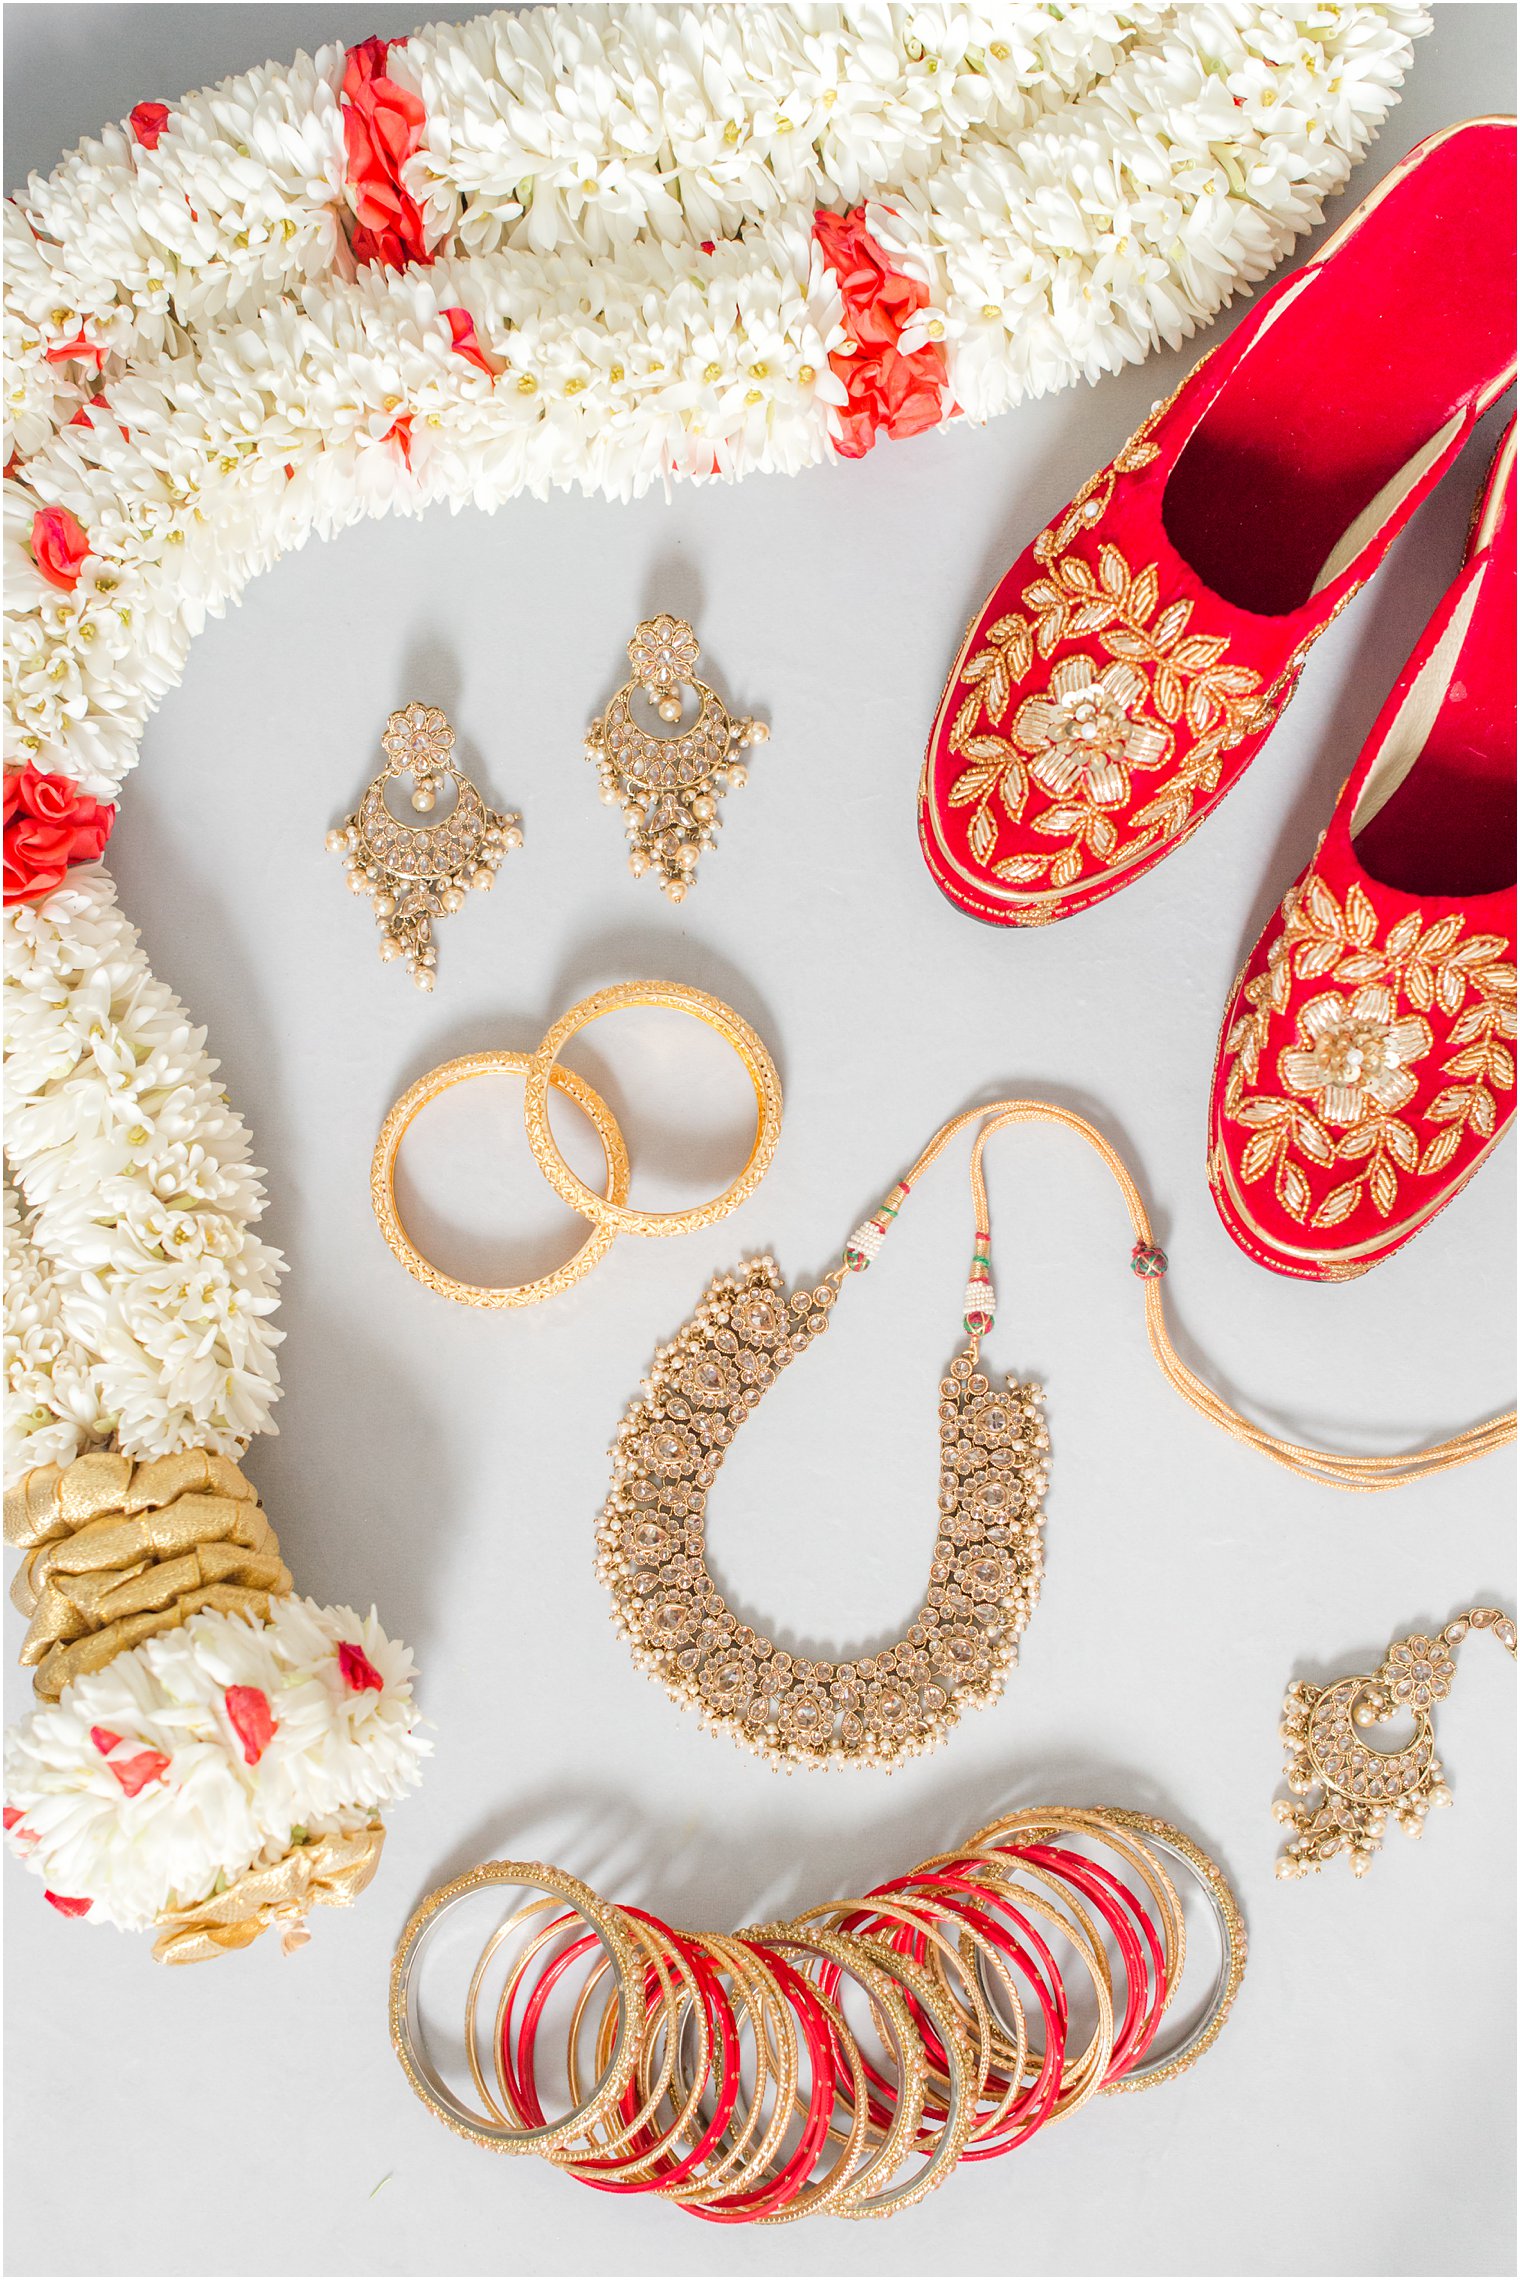 red and gold details for Indian wedding at the Ashford Estate